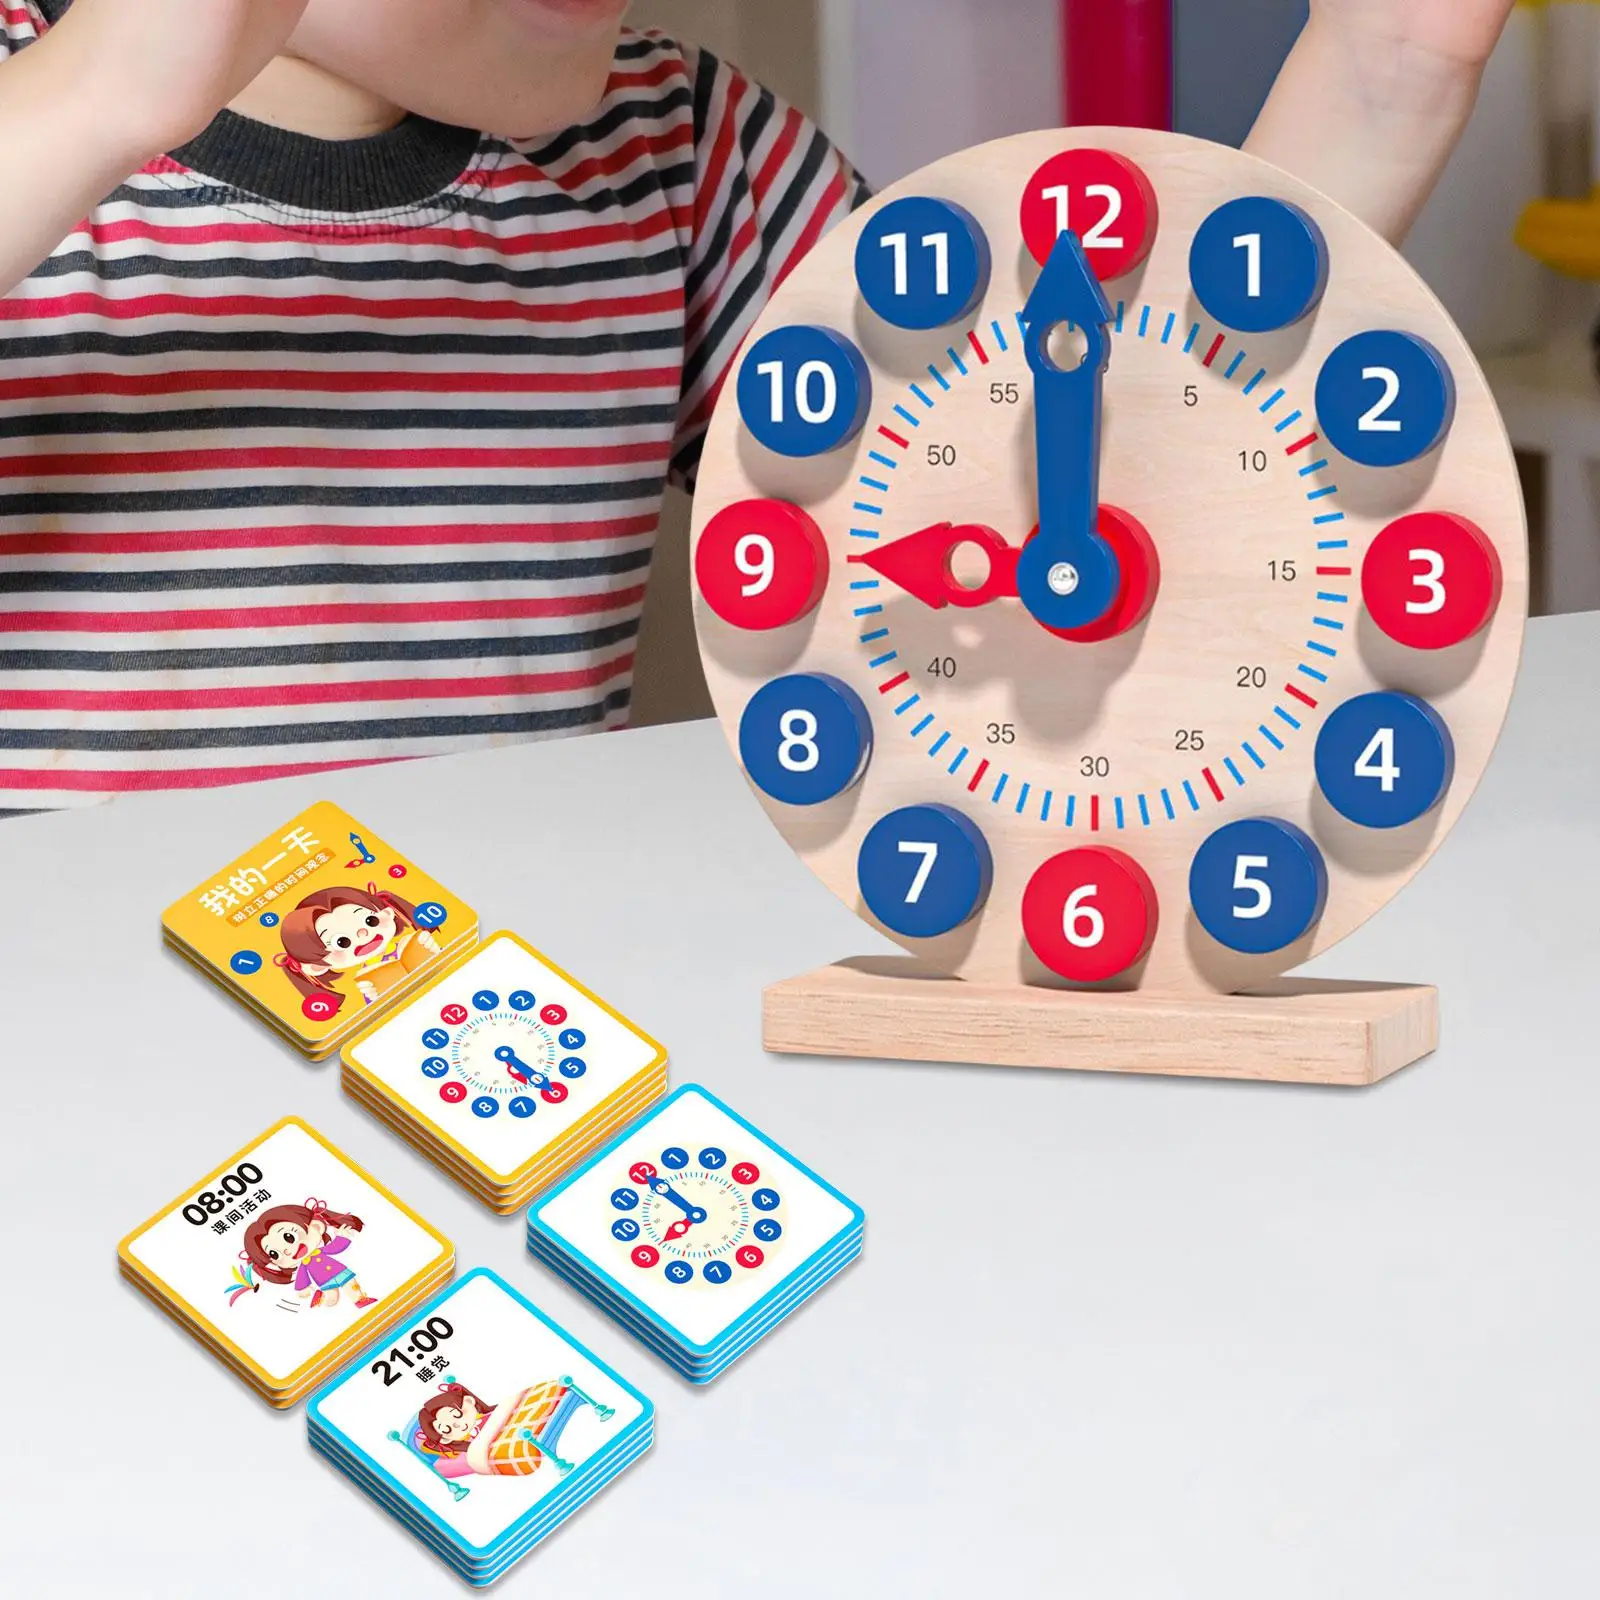 Wooden Toy Clock Portable Teaching Time Educational Clock 18 Reversible Time Cards for Gift Preschool Baby 3 Year Old